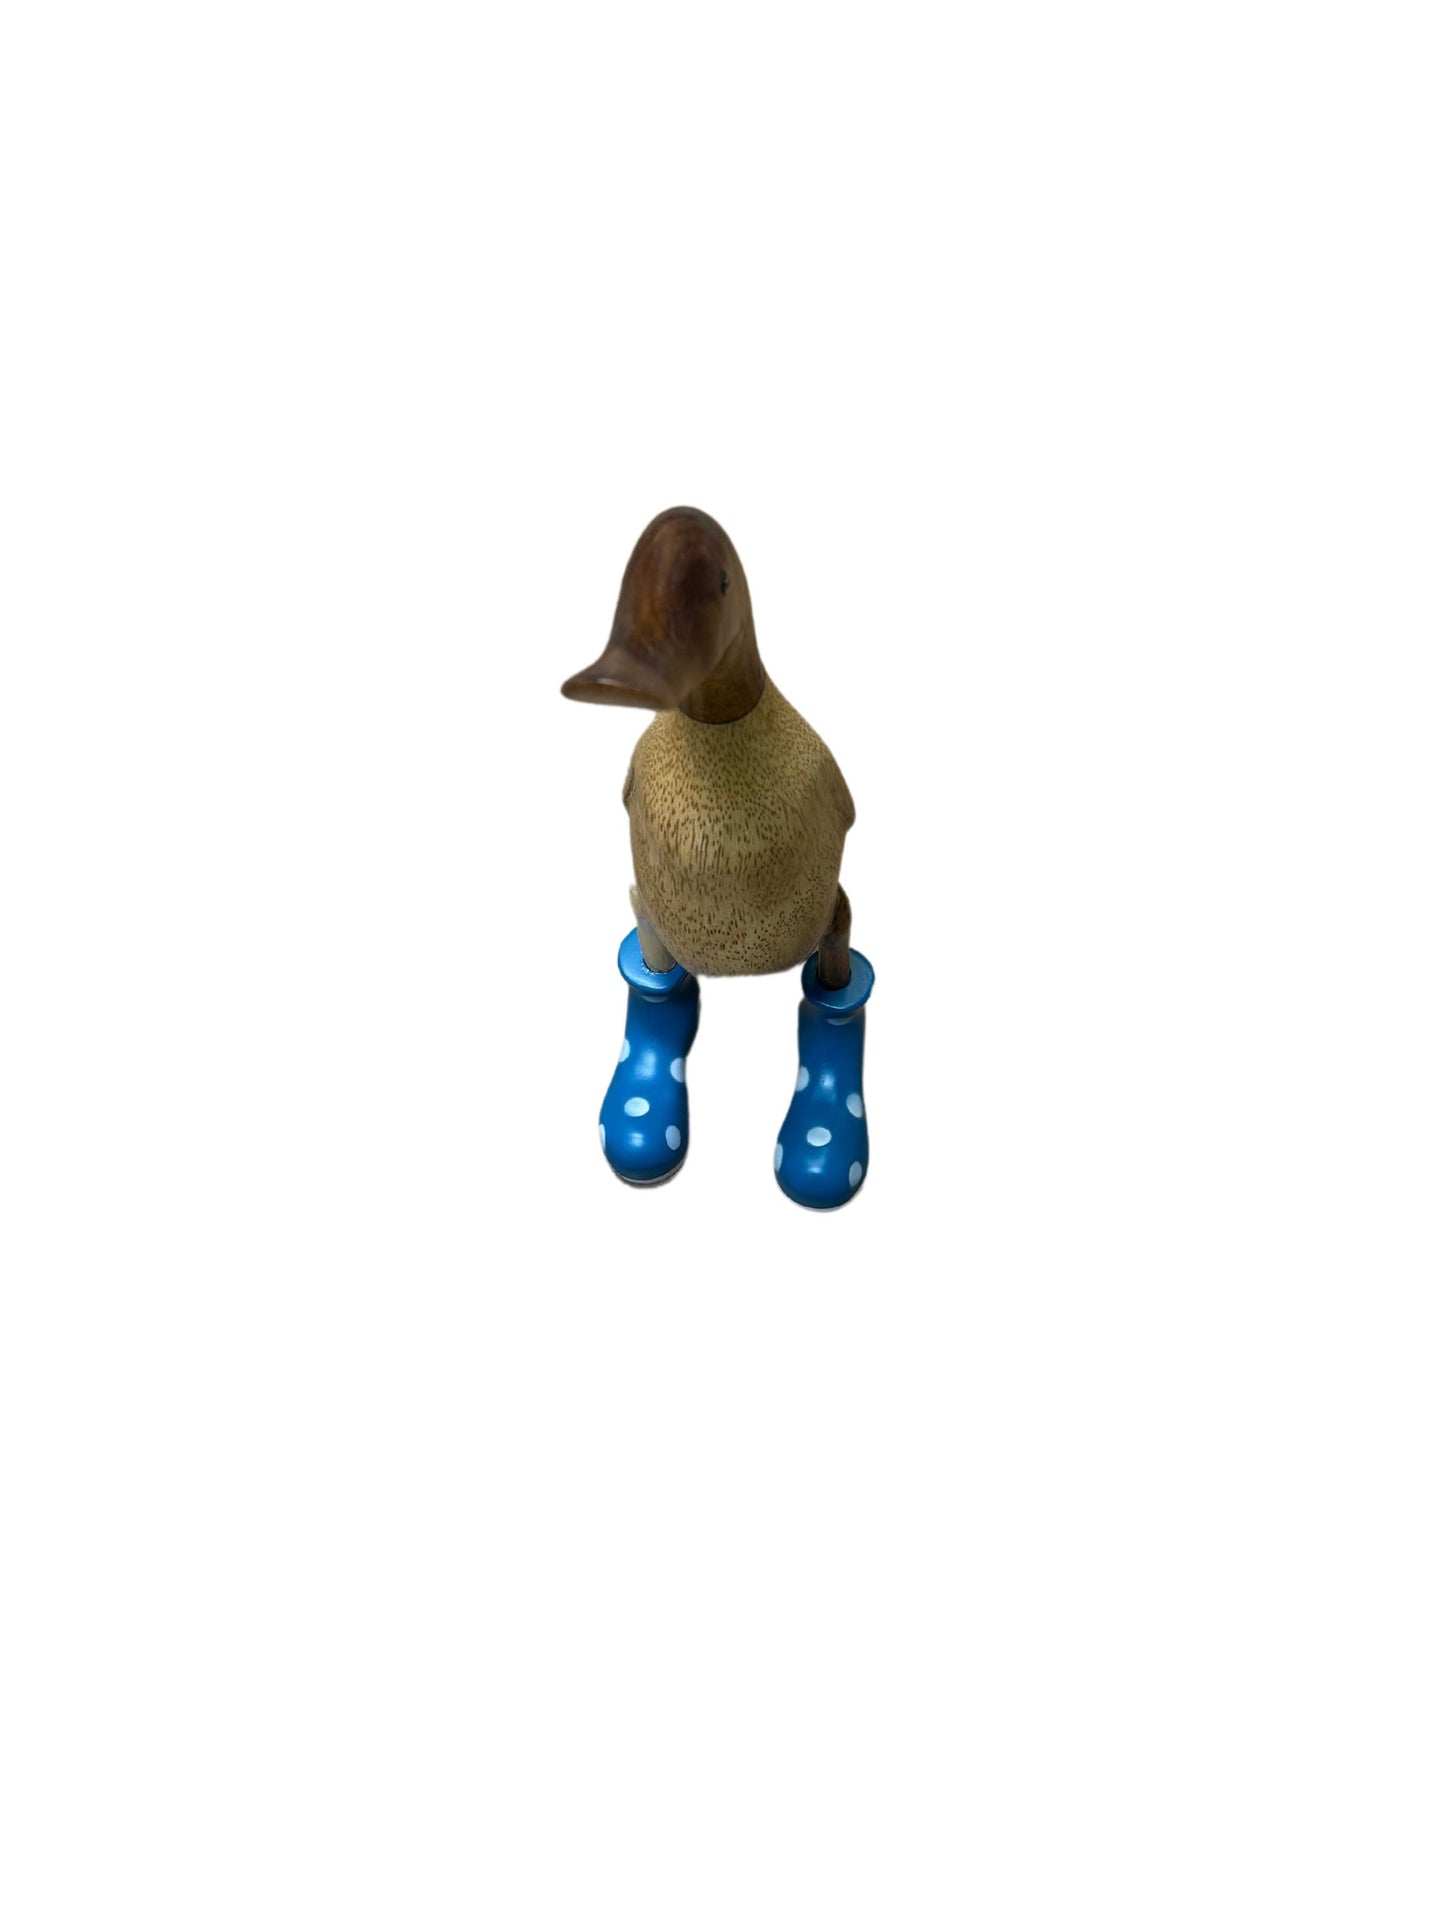 Eclectic Home Accent Duck in Boots Large Wooden  Decor Furniture